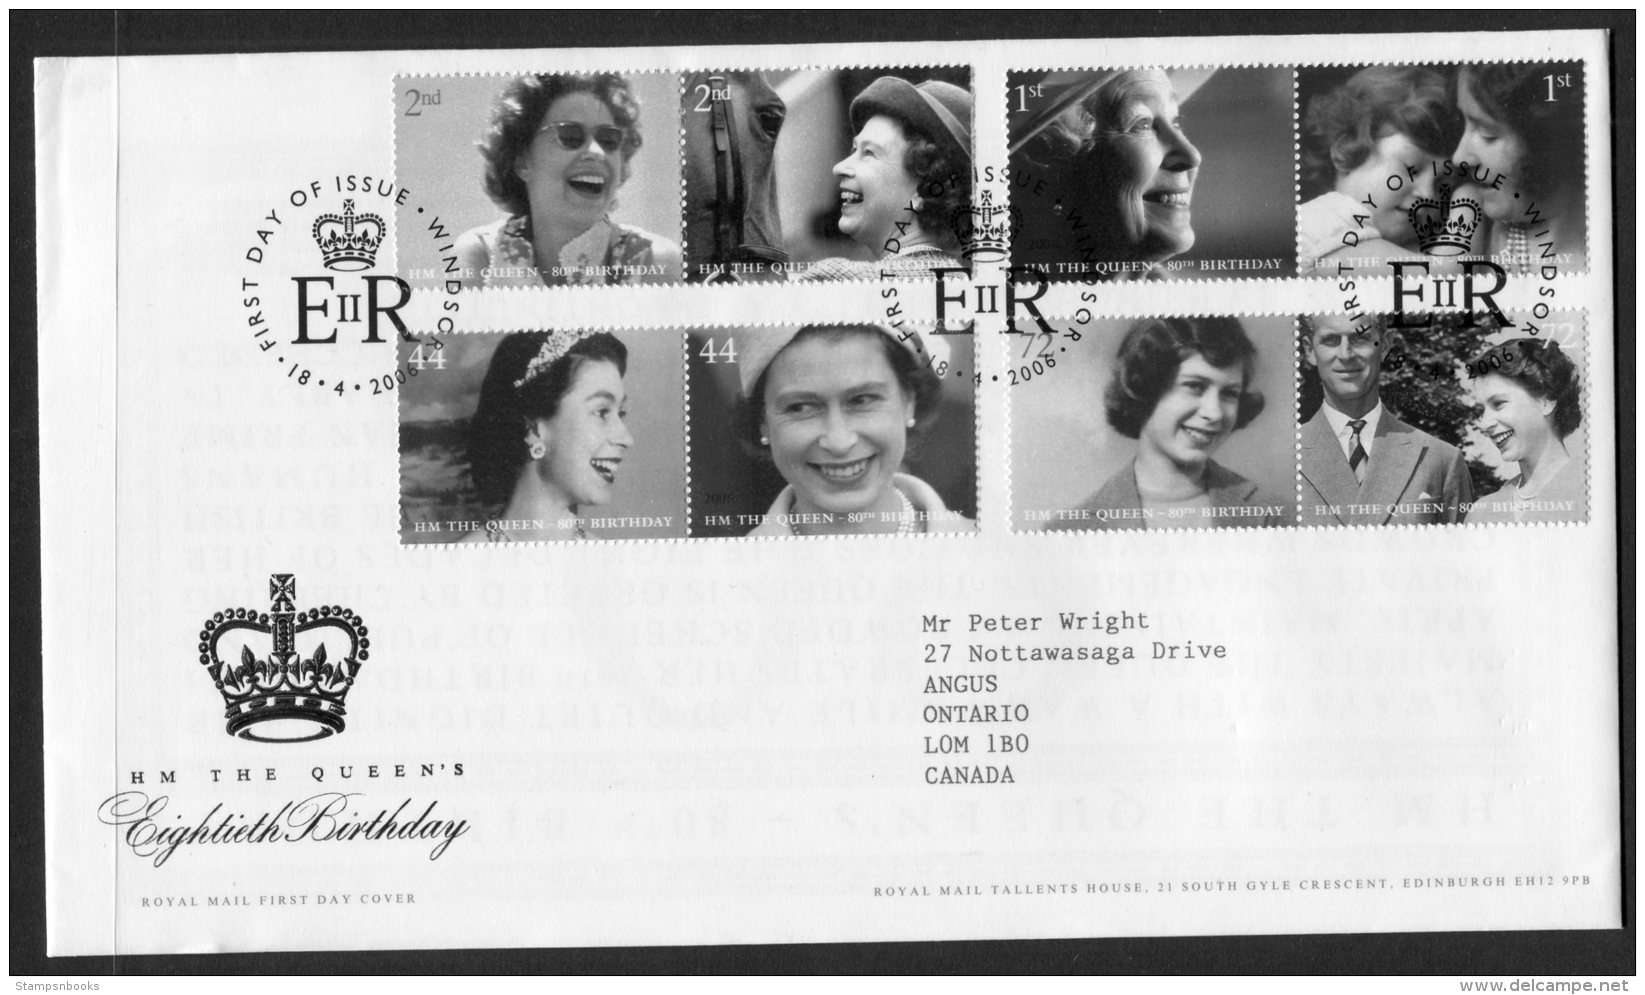 2006 GB HM The Queen's 80th Birthday FDC. Royalty Windsor First Day Cover - 2001-2010 Em. Décimales